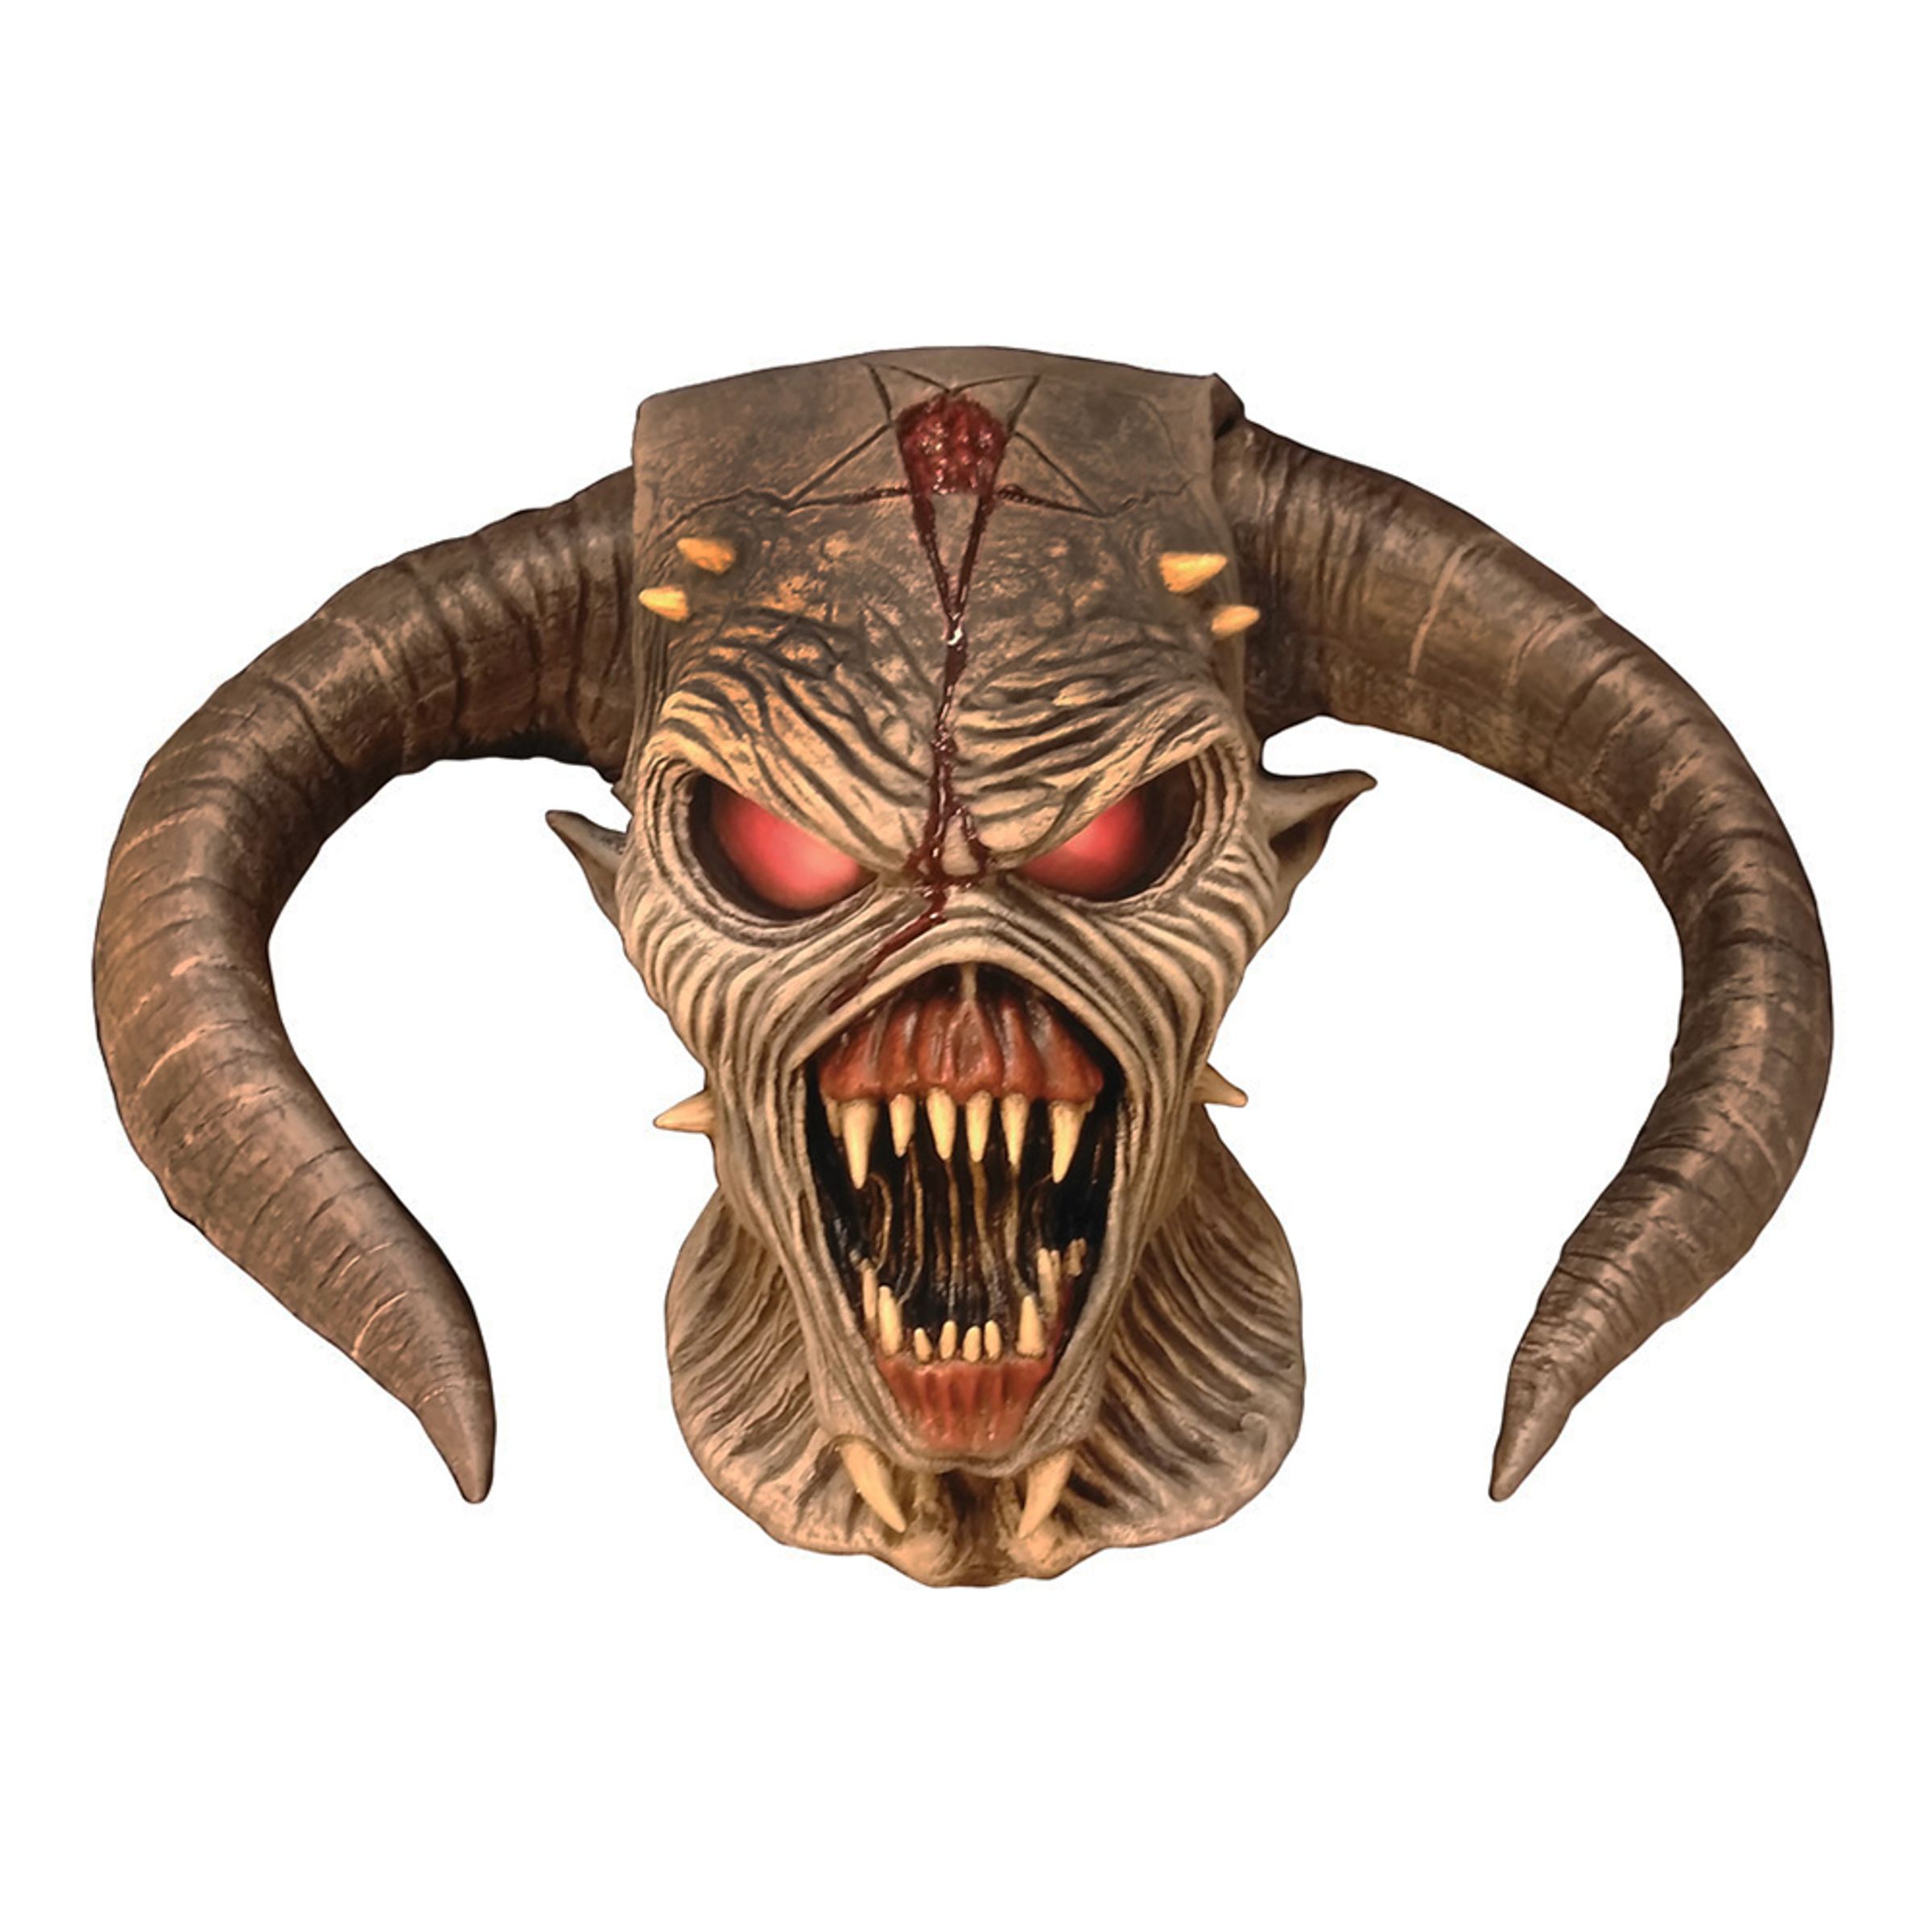 Iron Maiden Legacy of Beast Mask - One size